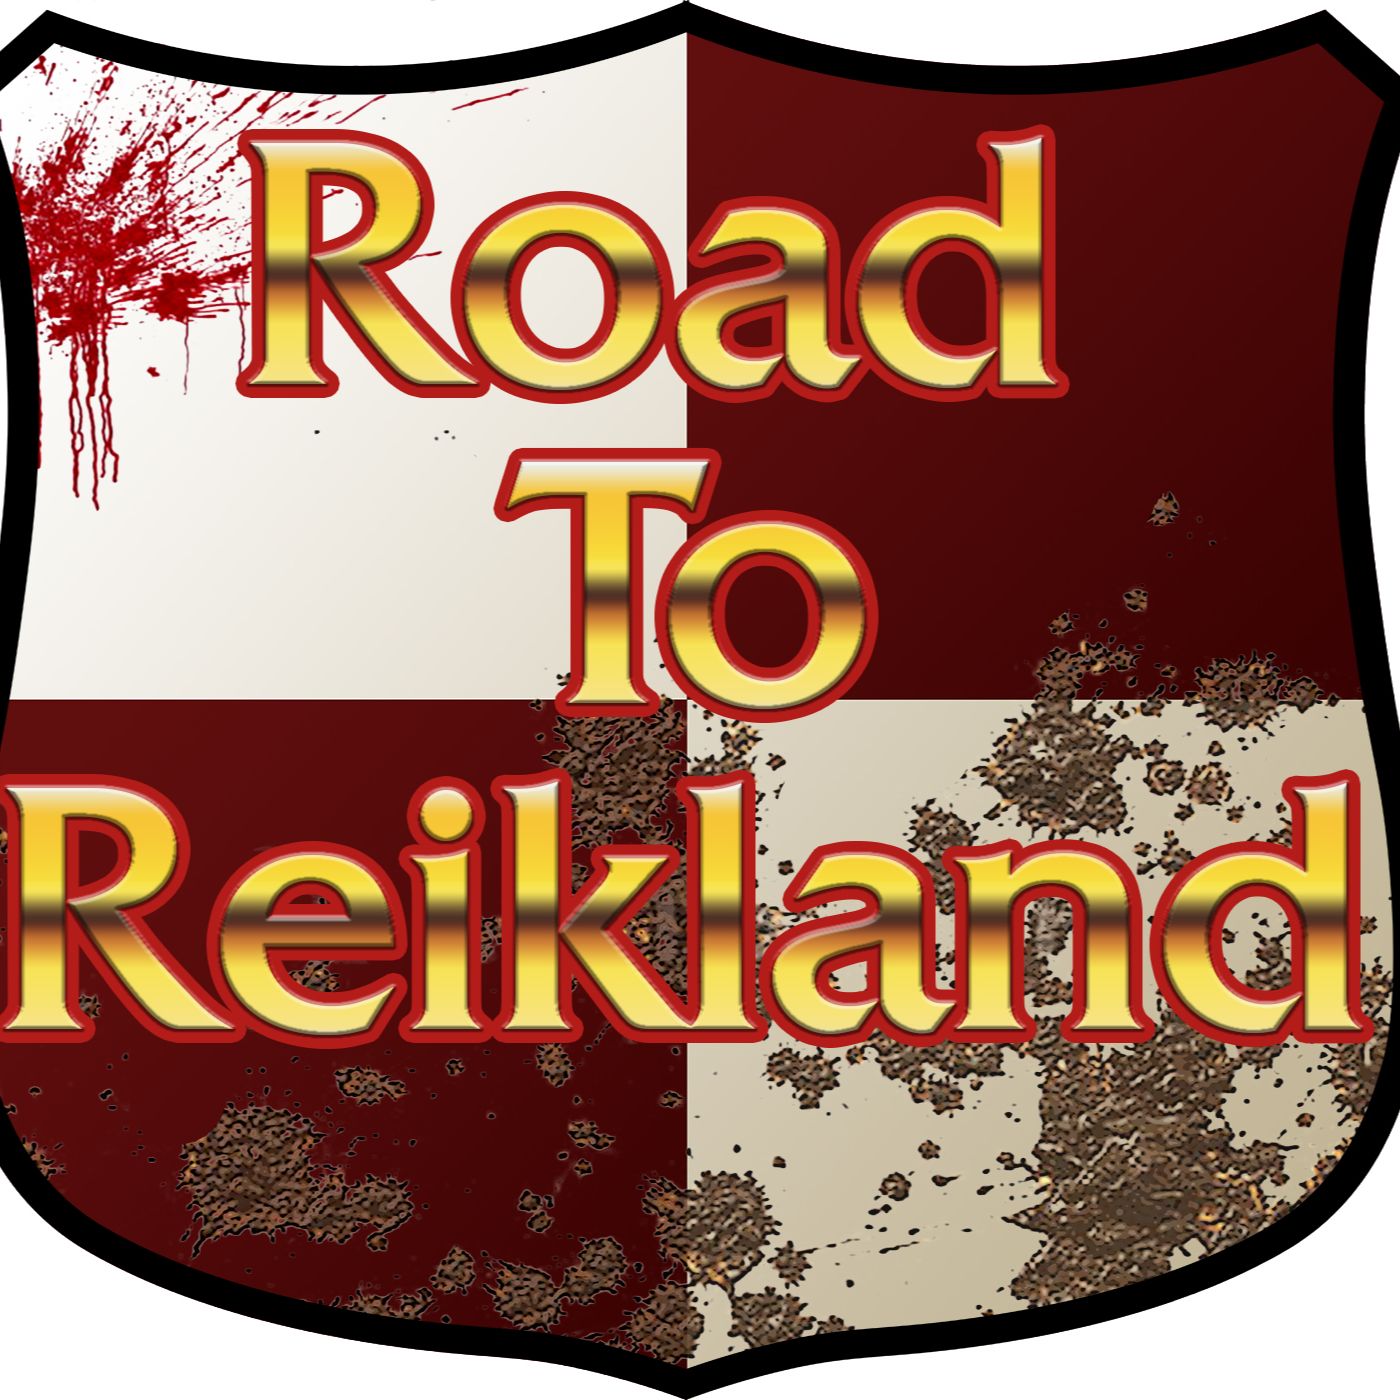 Road To Terra / Road To Reikland